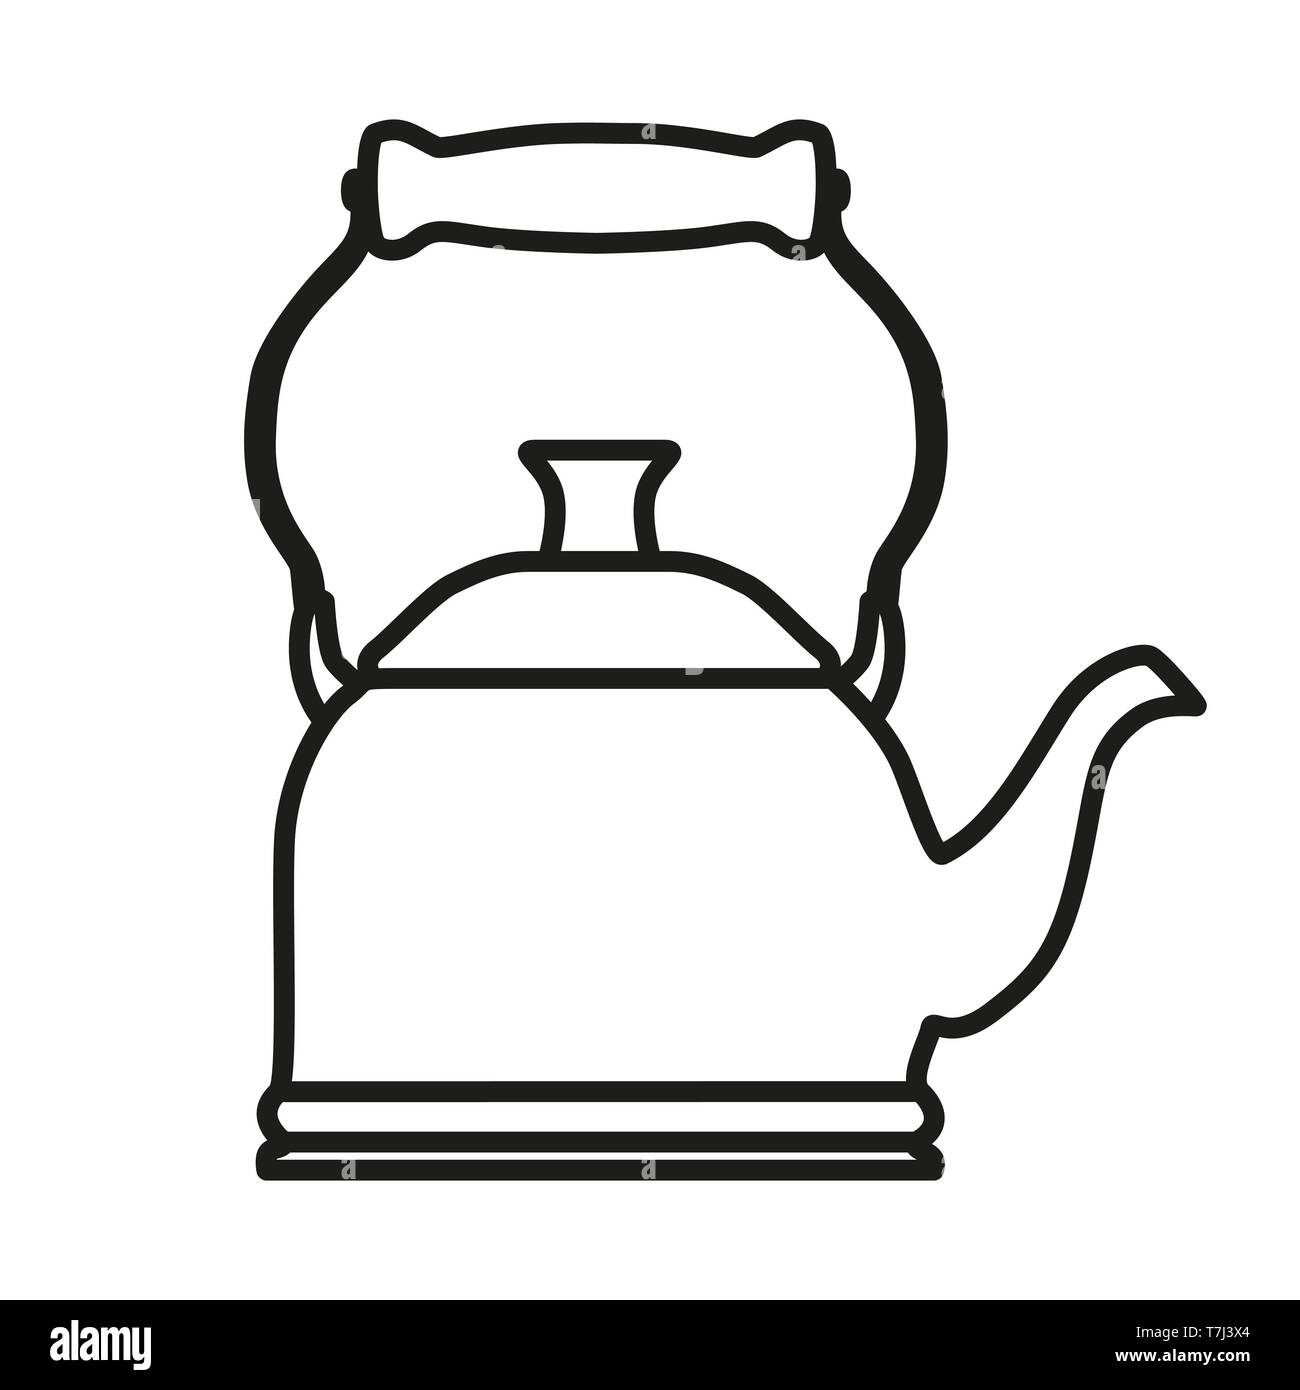 Tea kettle line icon isolated on white background. Outline thin simple appliance vector. Stock Vector